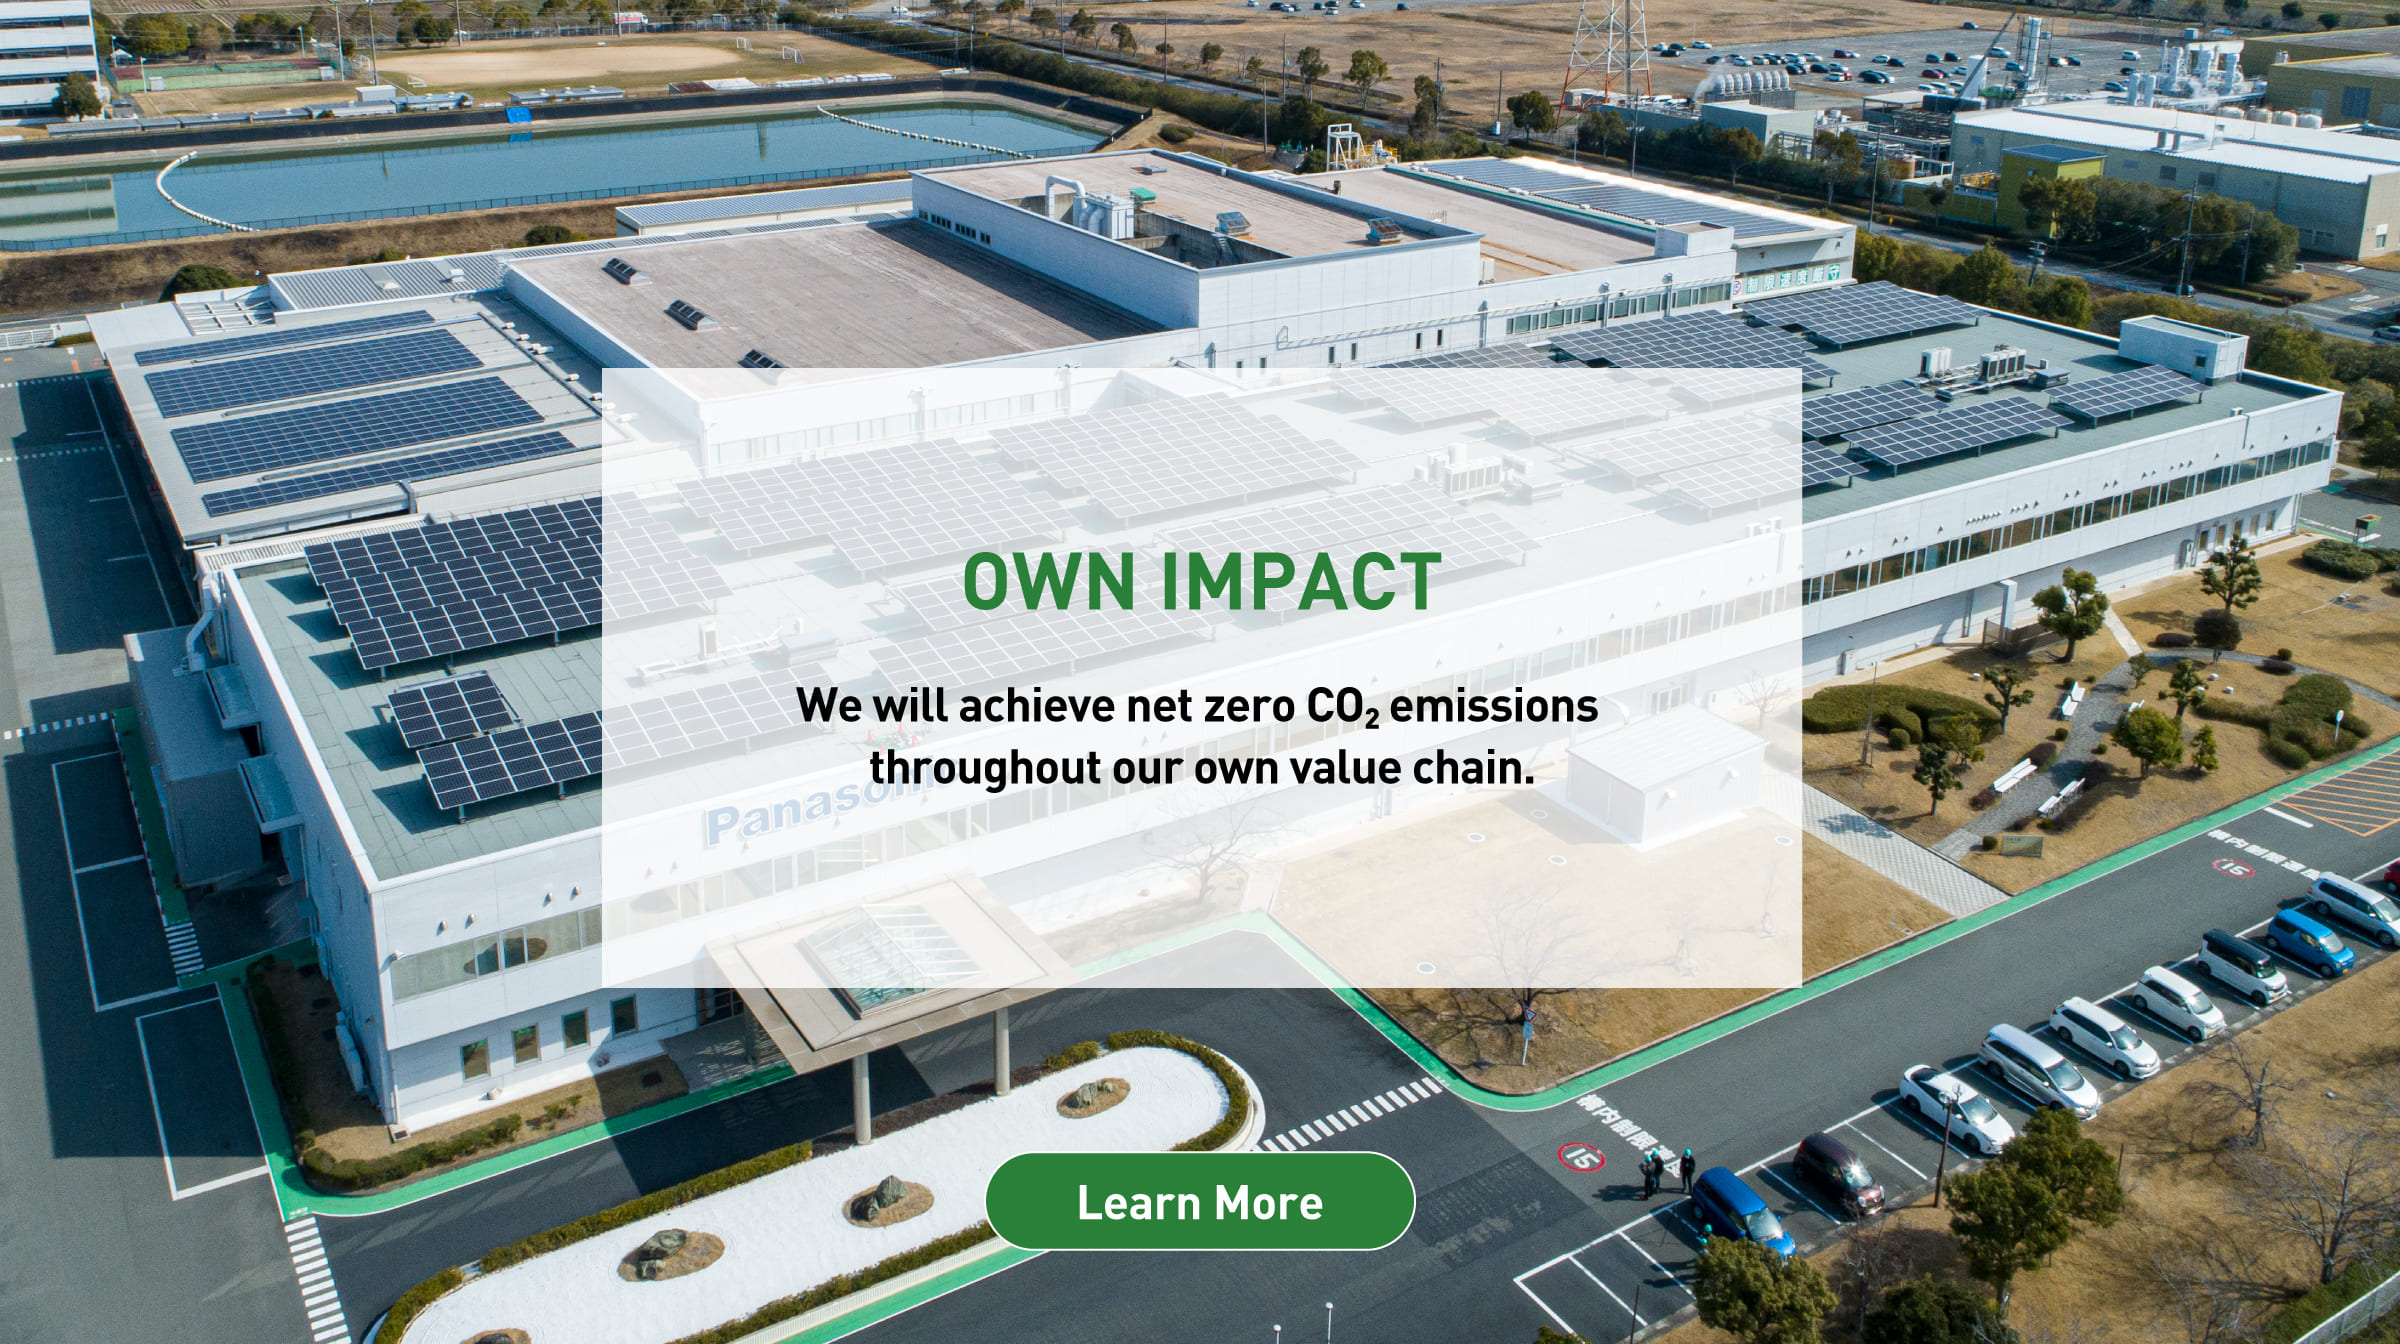 OWN IMPACT We will achieve net zero CO2 emissions throughout our own value chain. Learn More 